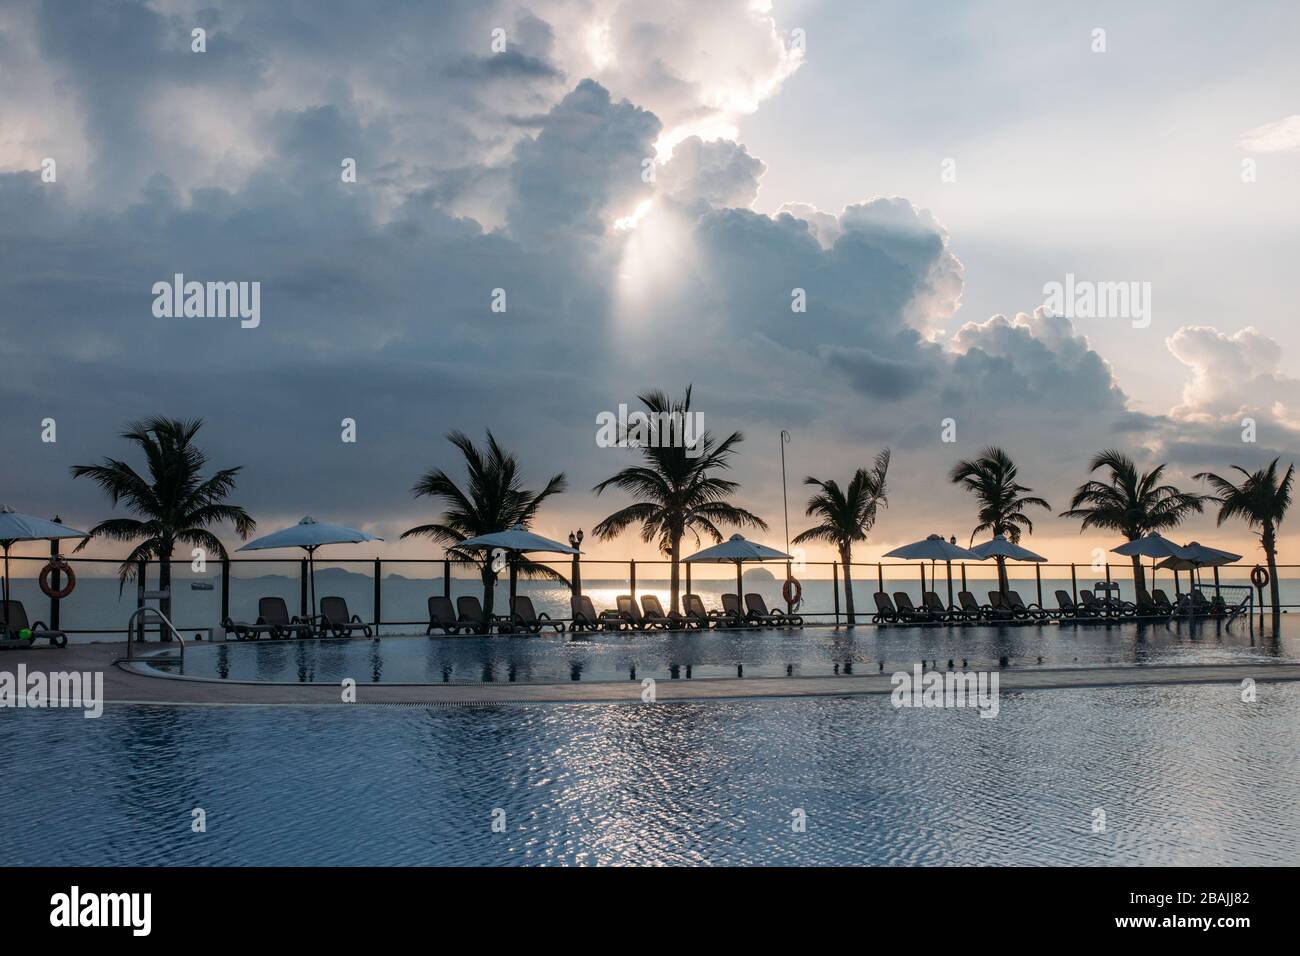 Swimming pool, palm trees around, reflection of palm trees in the pool, dawn with a beautiful cloudy sky. An empty area with many sunbeds, the sun pas Stock Photo